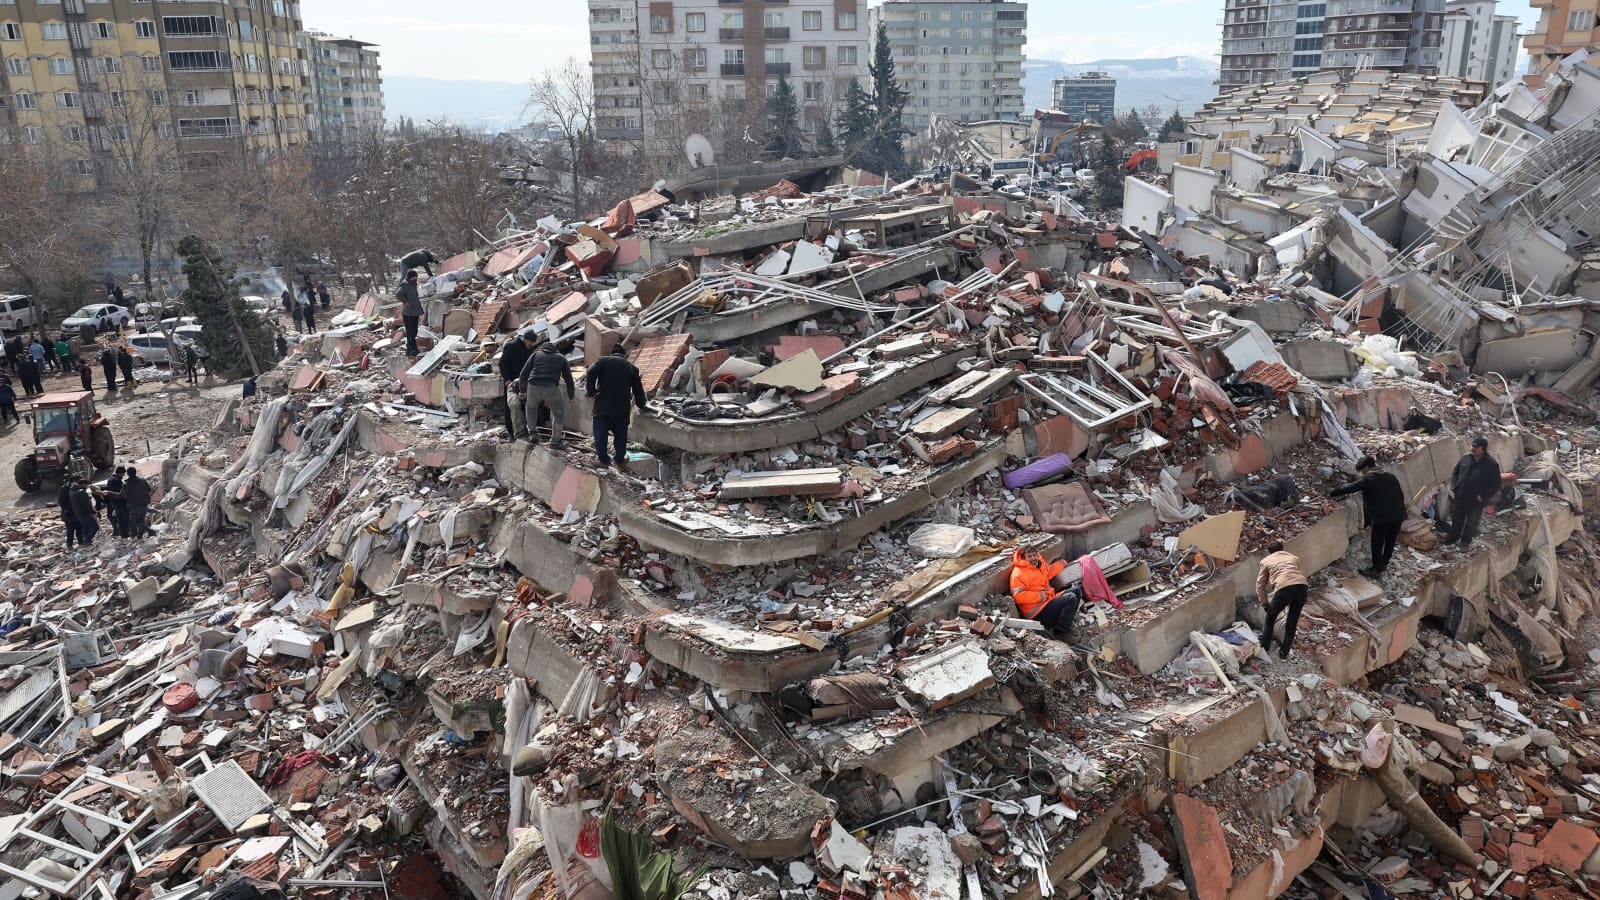 A pivotal period for Turkey's future has passed since the country's terrible earthquake.